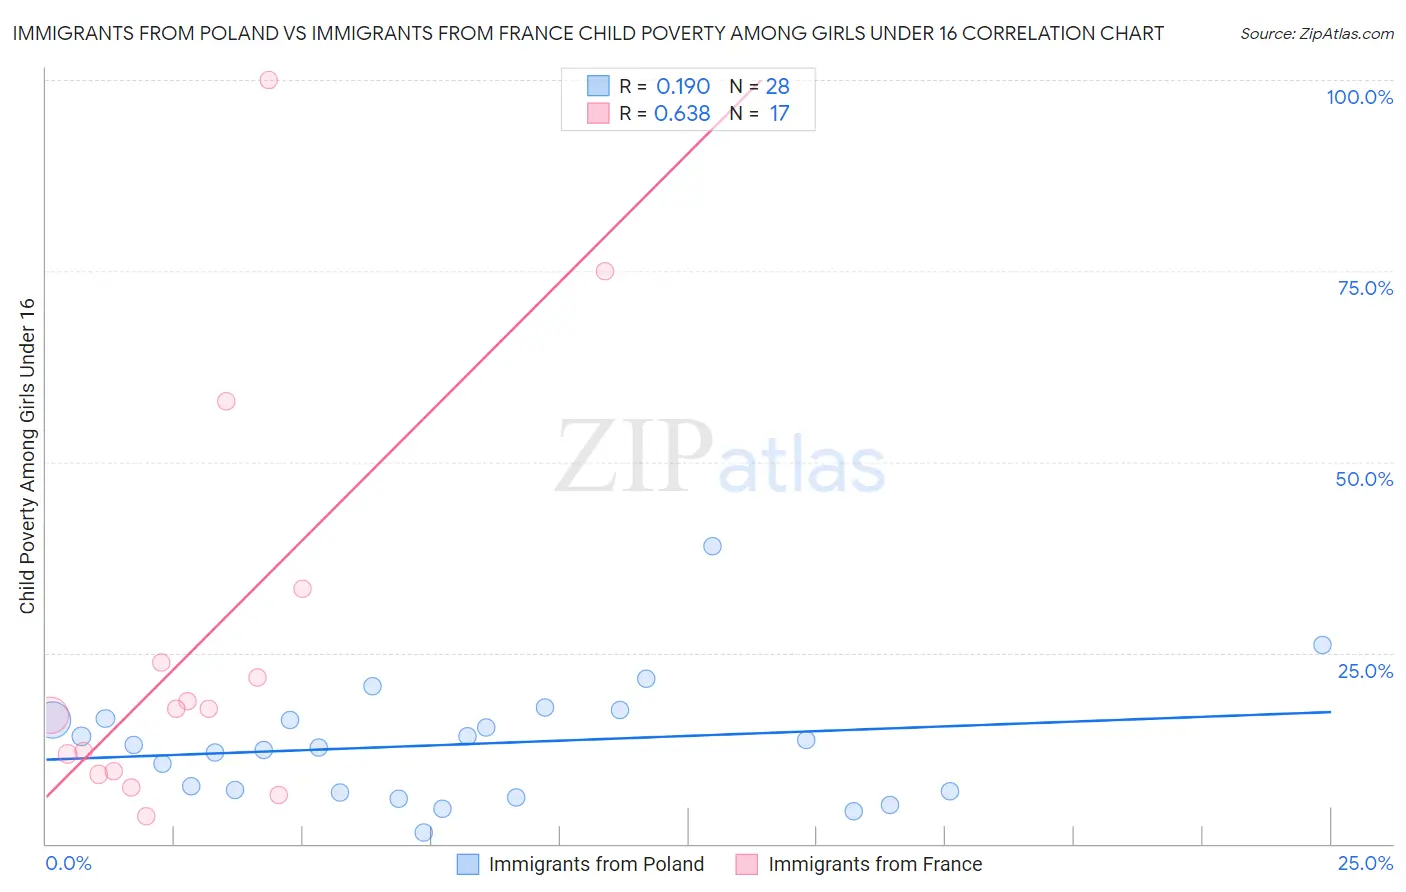 Immigrants from Poland vs Immigrants from France Child Poverty Among Girls Under 16